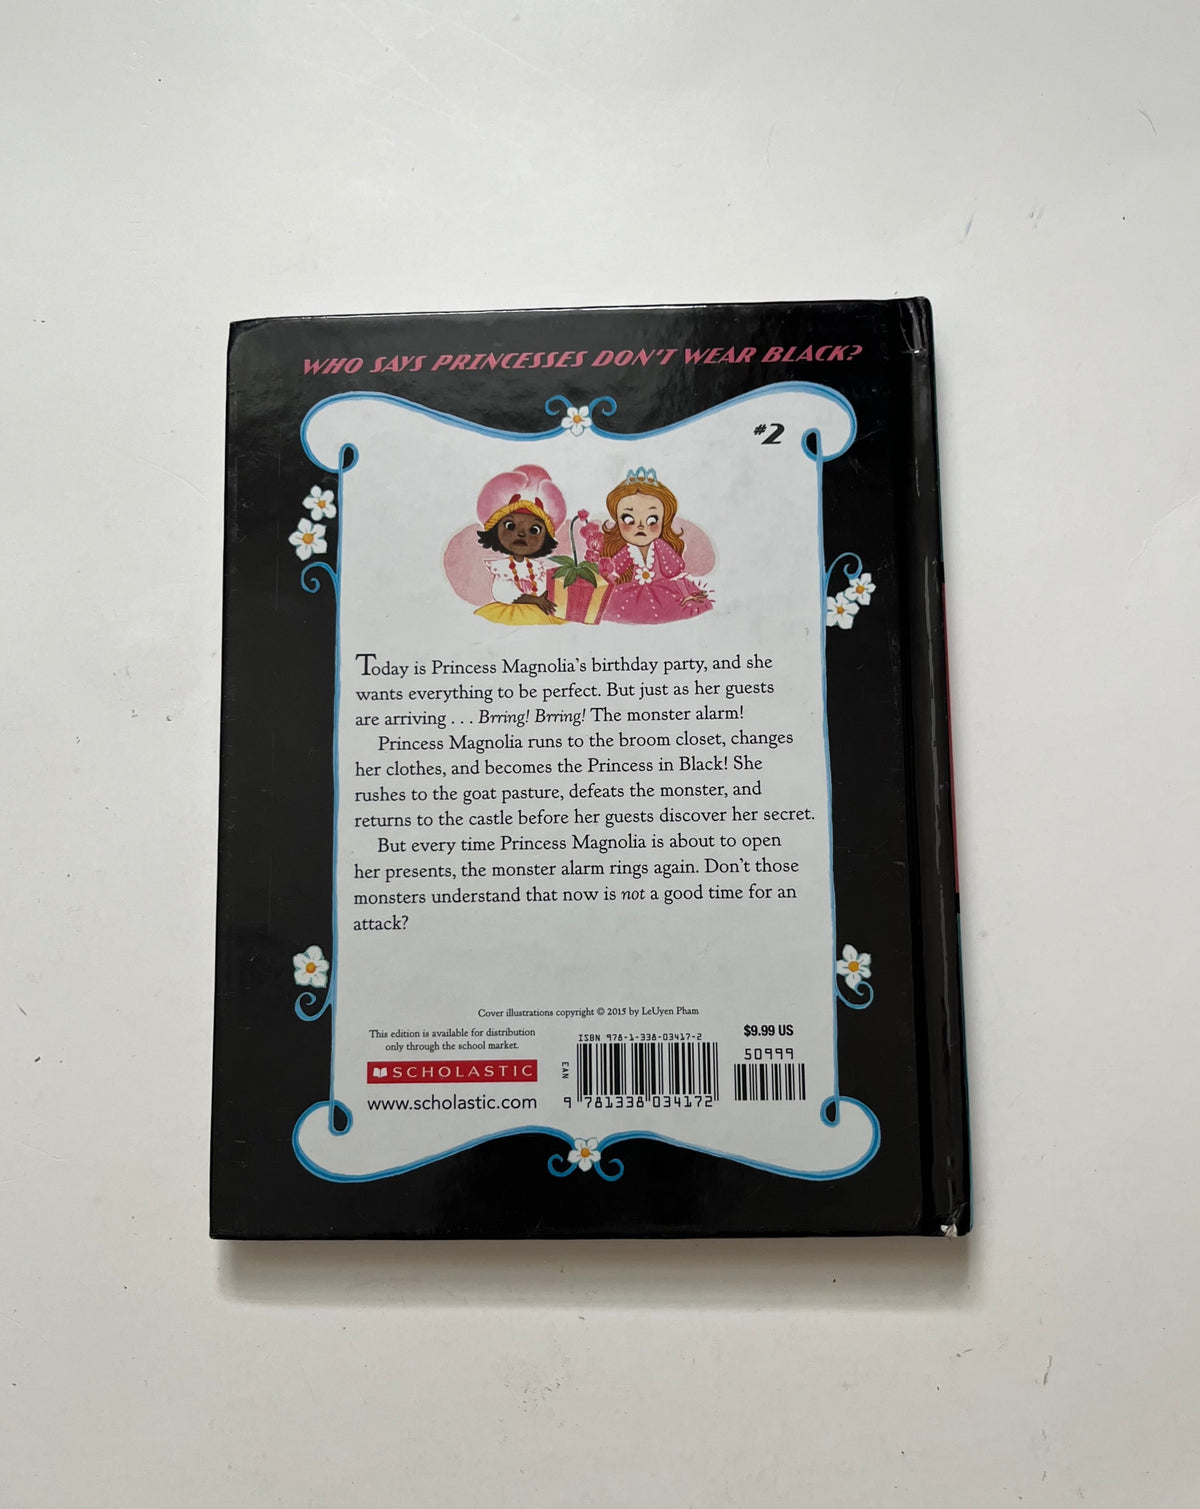 The Princess in Black and the Perfect Princess Party by Shannon Hale &amp; Dean Hale &amp; LeUyen Pham